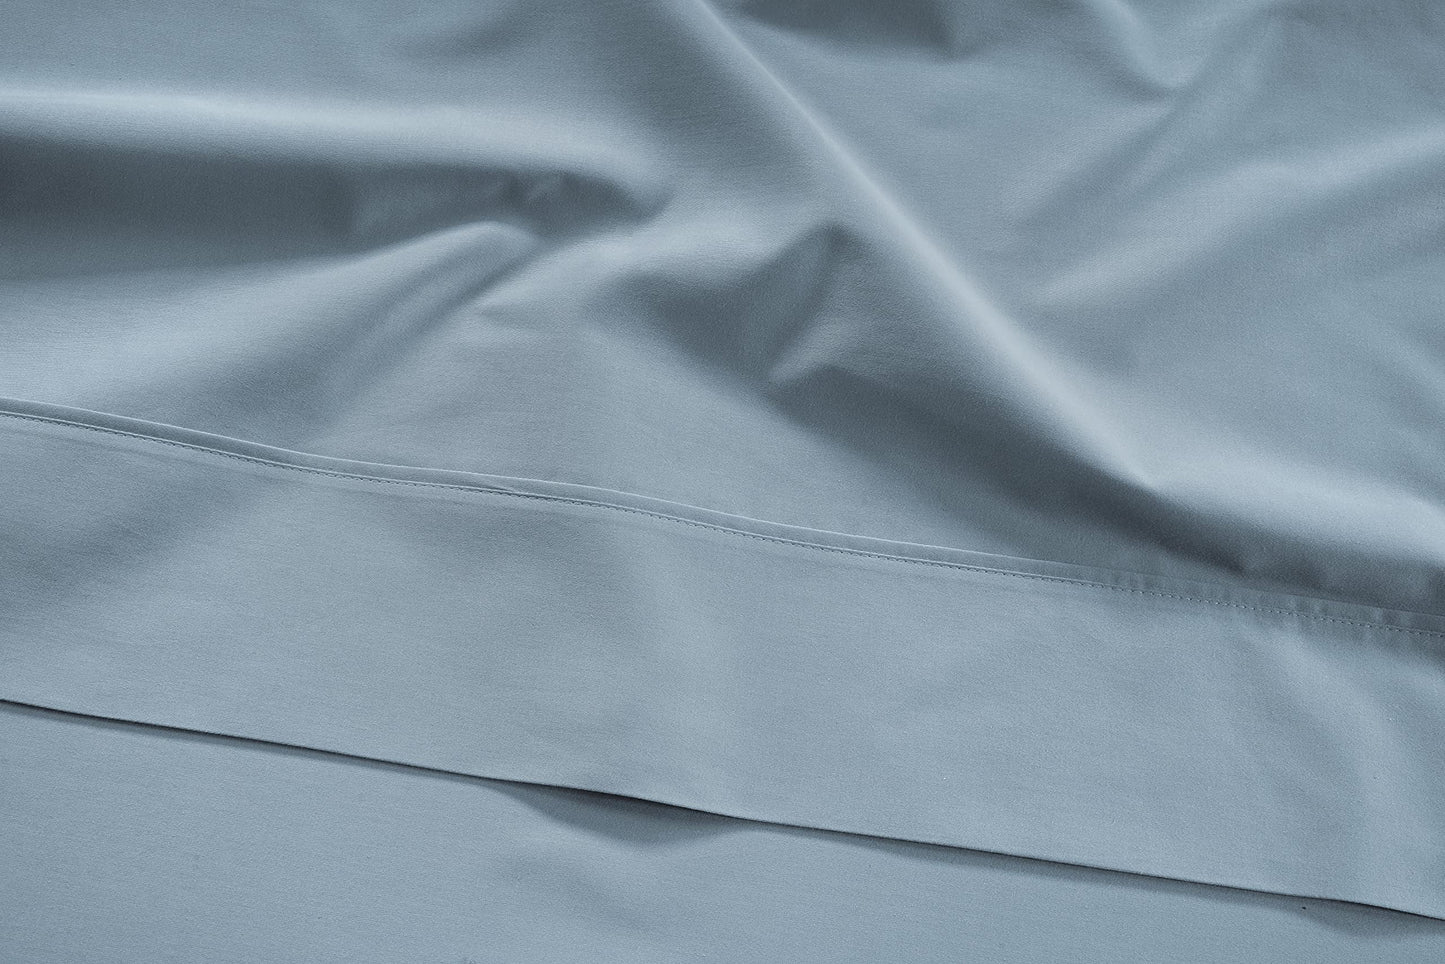 Lane Linen 100% Cotton Sheets Full Size Bed Sheets, 450 Thread Count 100% Cotton Sheets, 4PC Bed Sheets Full Size, Soft & Breathable Full Size Sheets Deep Pocket Set, Hotel Luxury Sheets - French Blue